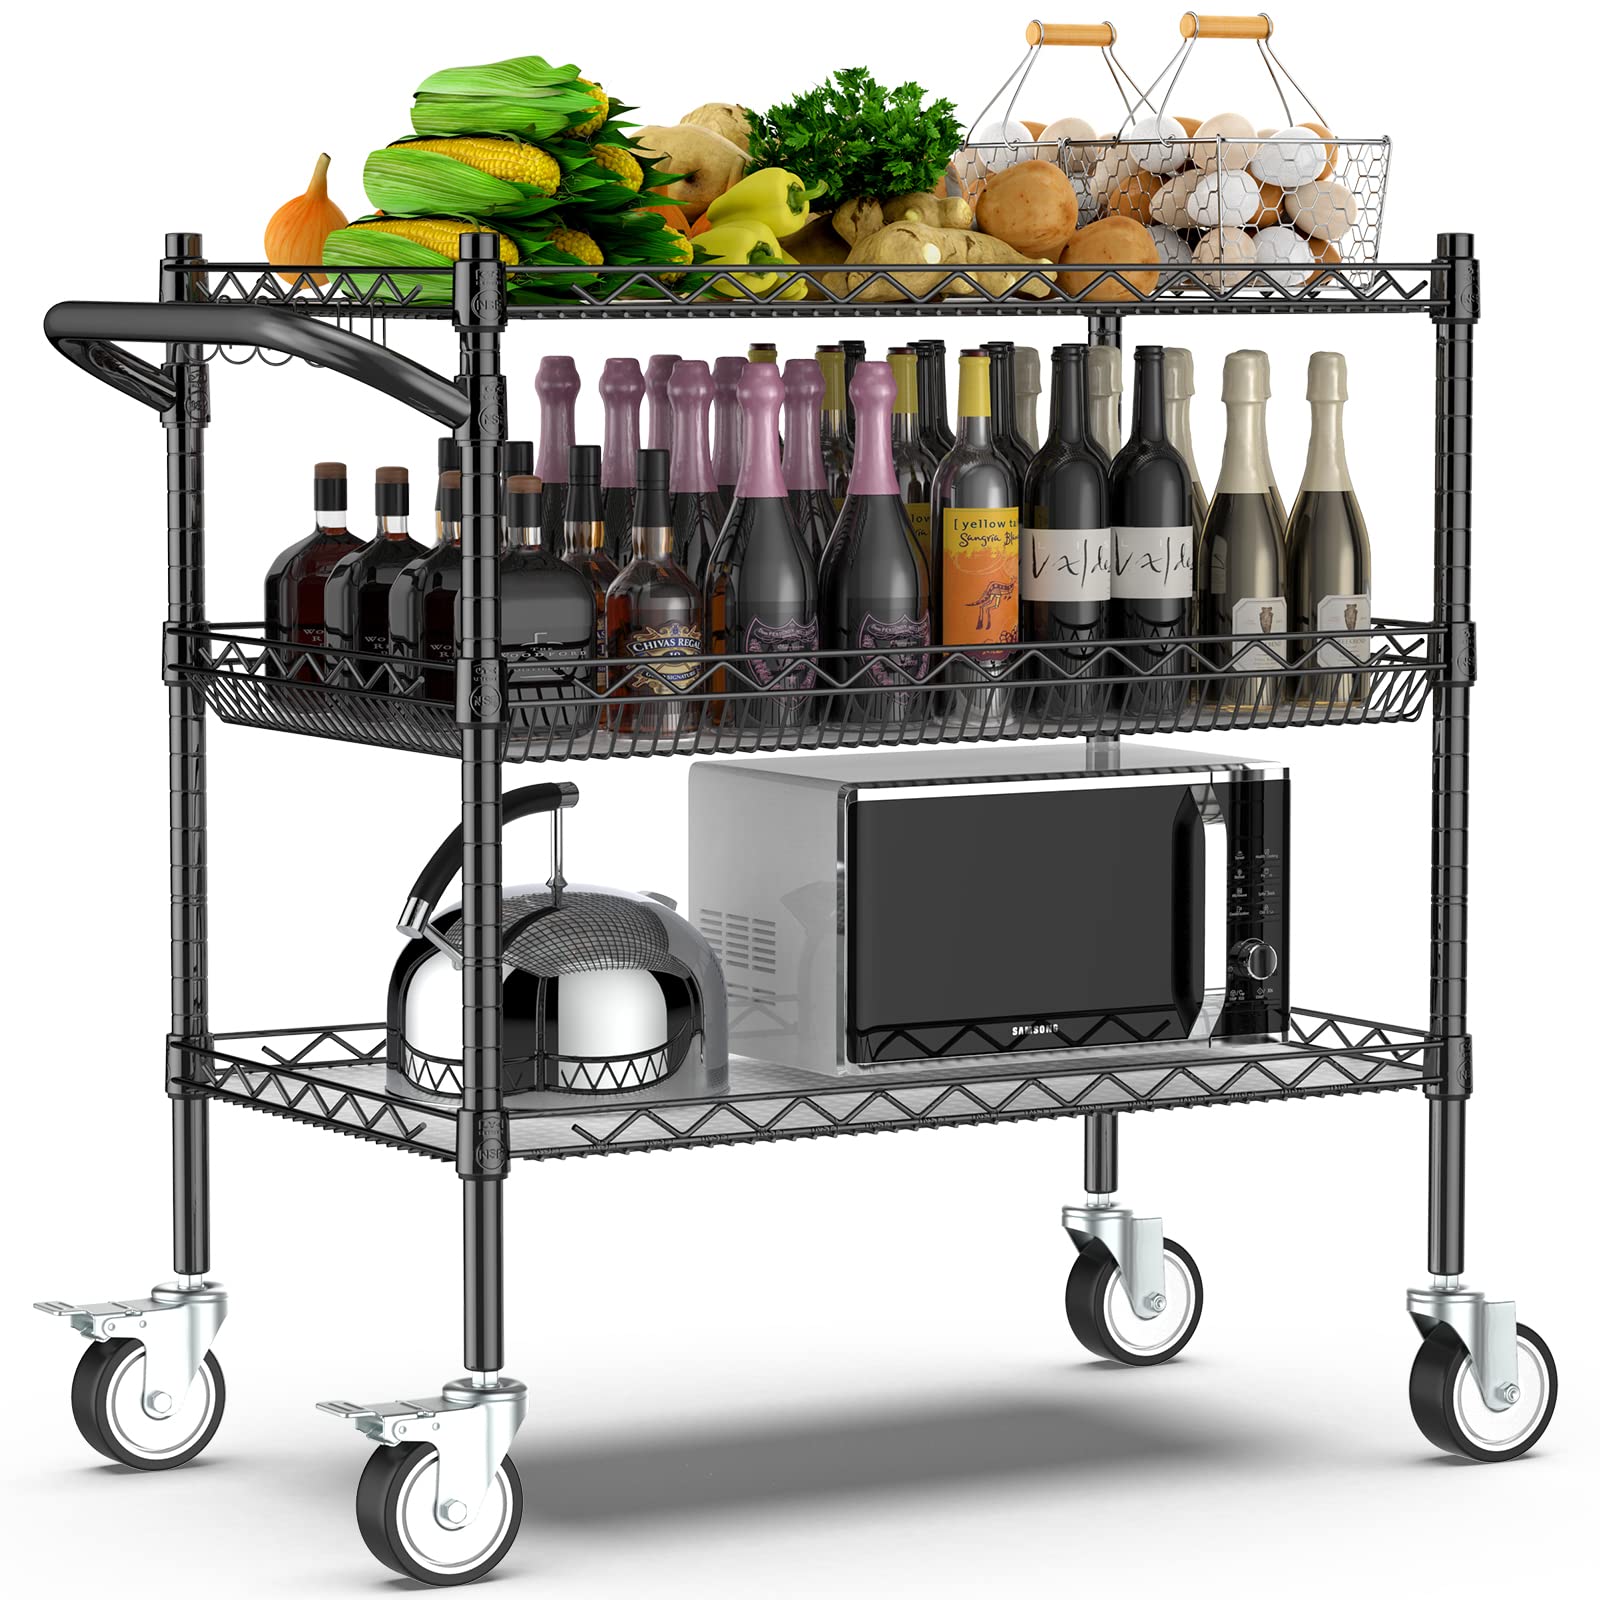 Leteuke 3 Tier Rolling Carts with Wheels,990Lbs Heavy Duty Rolling Utility Cart,NSF Commercial Grade Metal Cart with Handle&Shelf Liner,Trolley Serving Cart for Kitchen,Restaurant,Plant Display,Black